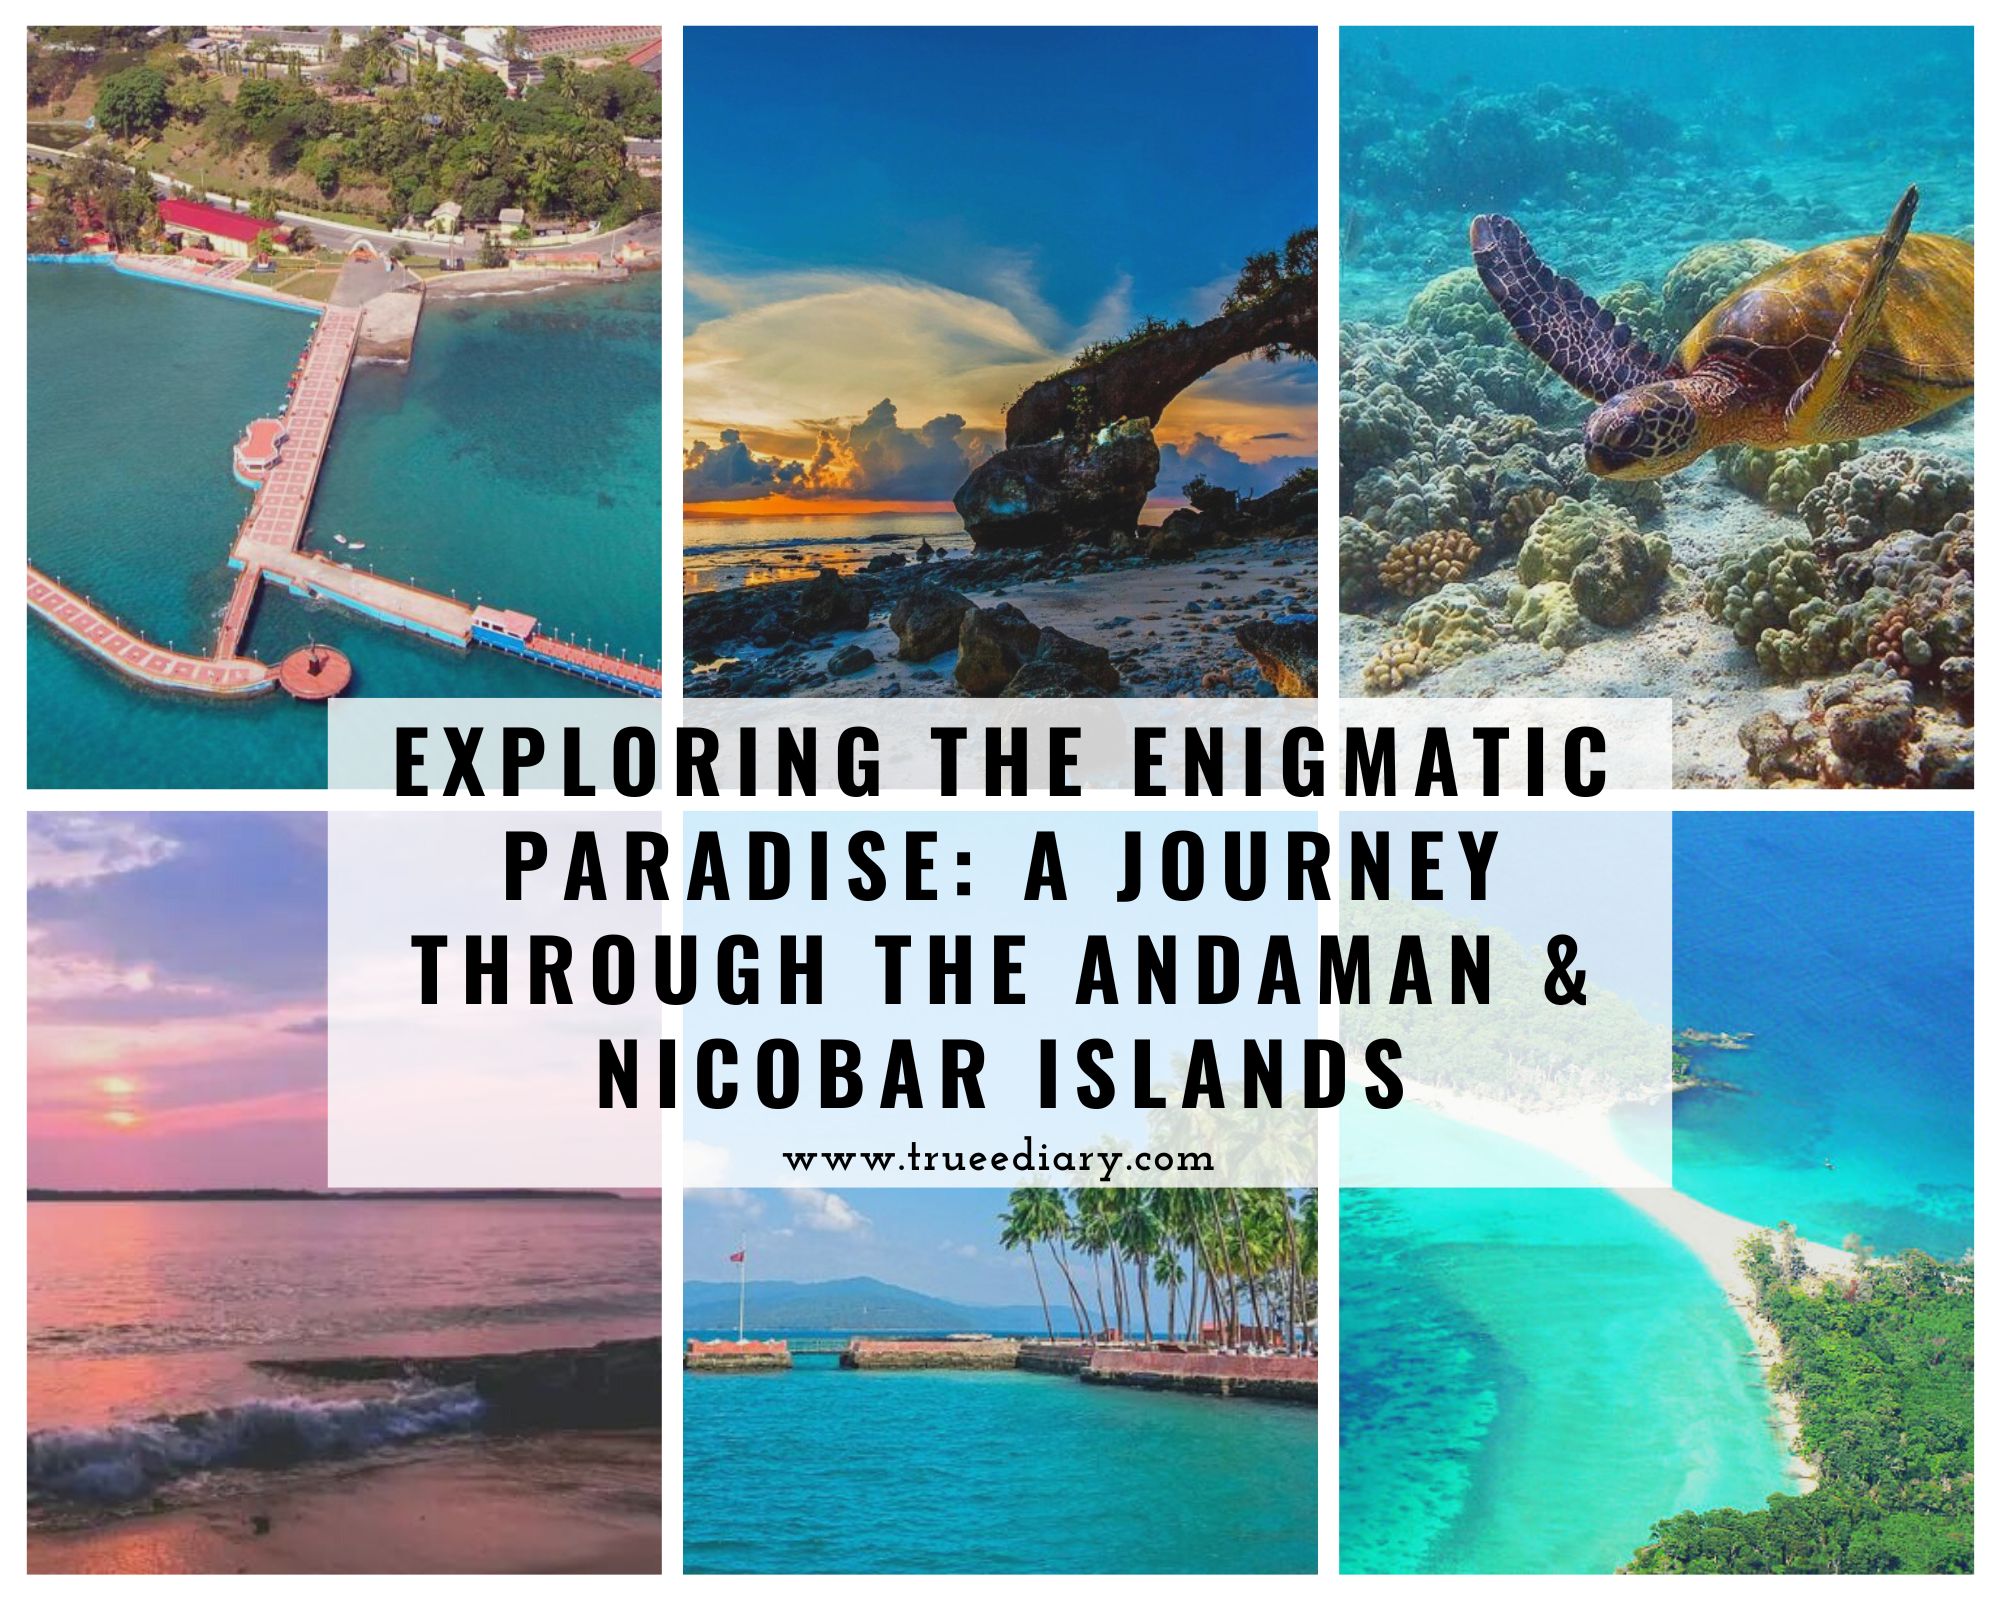 Exploring the Enigmatic Paradise: A Journey through the Andaman & Nicobar Islands